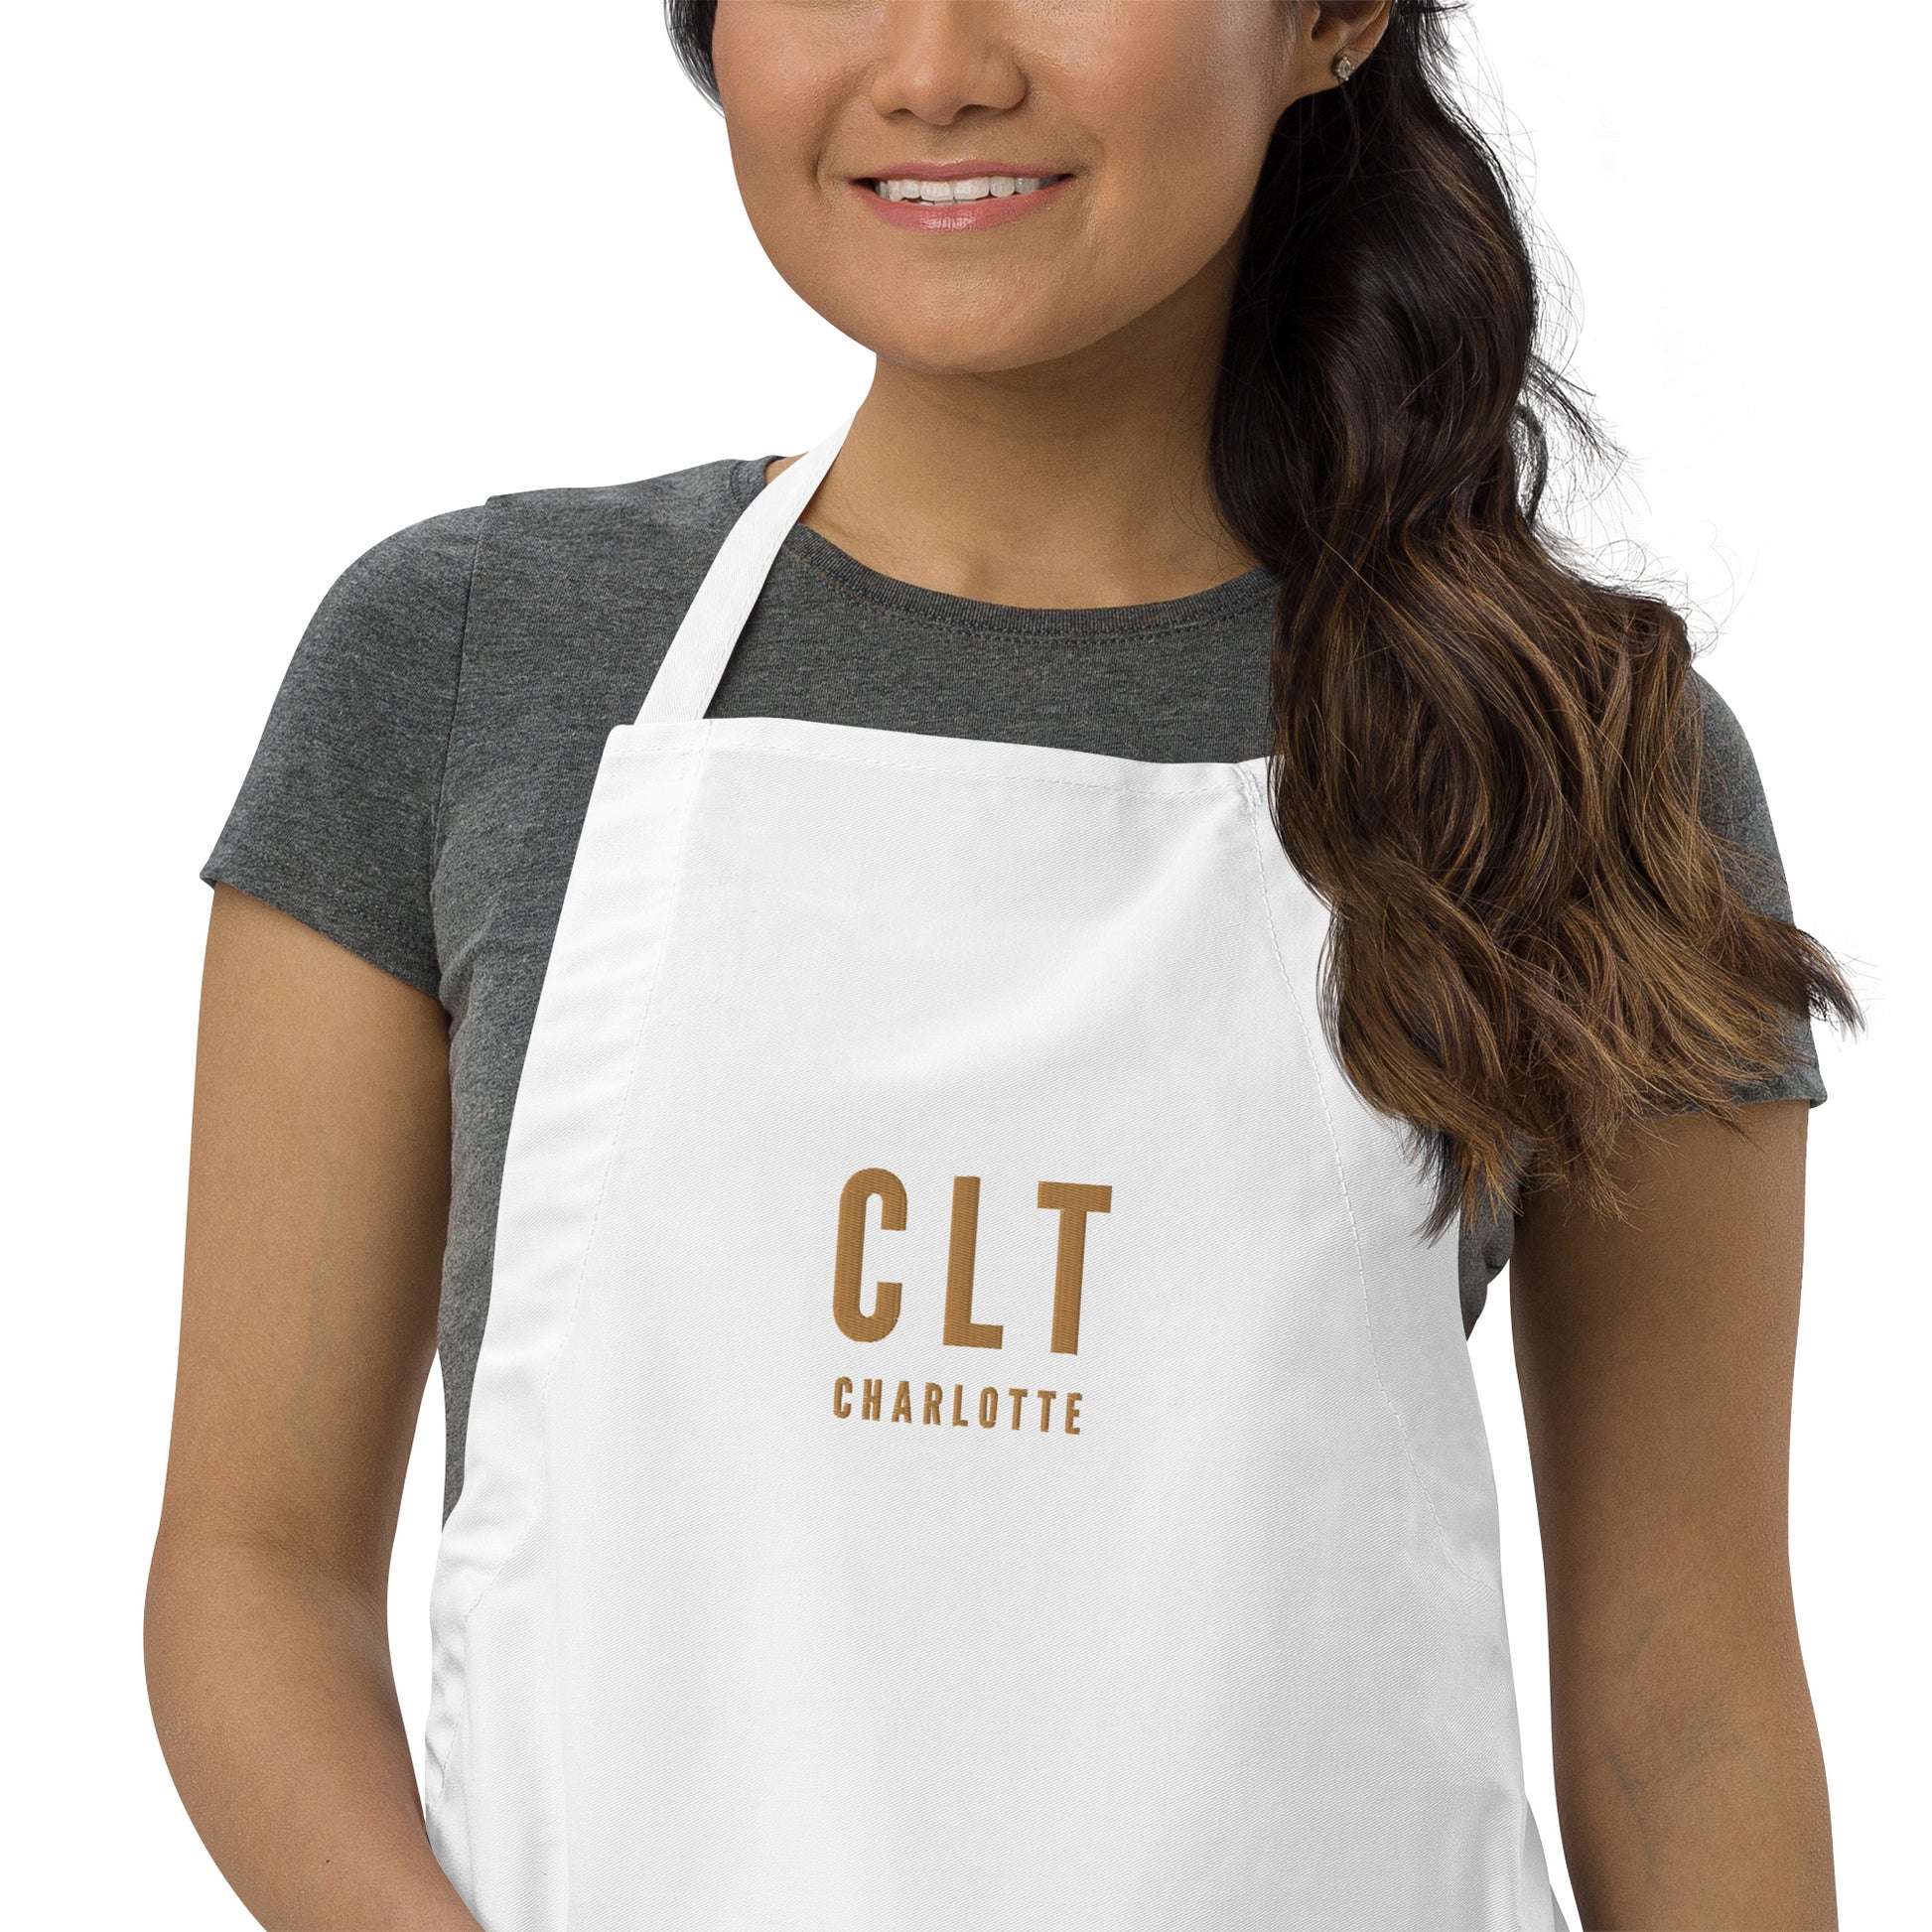 City Embroidered Apron - Old Gold • CLT Charlotte • YHM Designs - Image 08